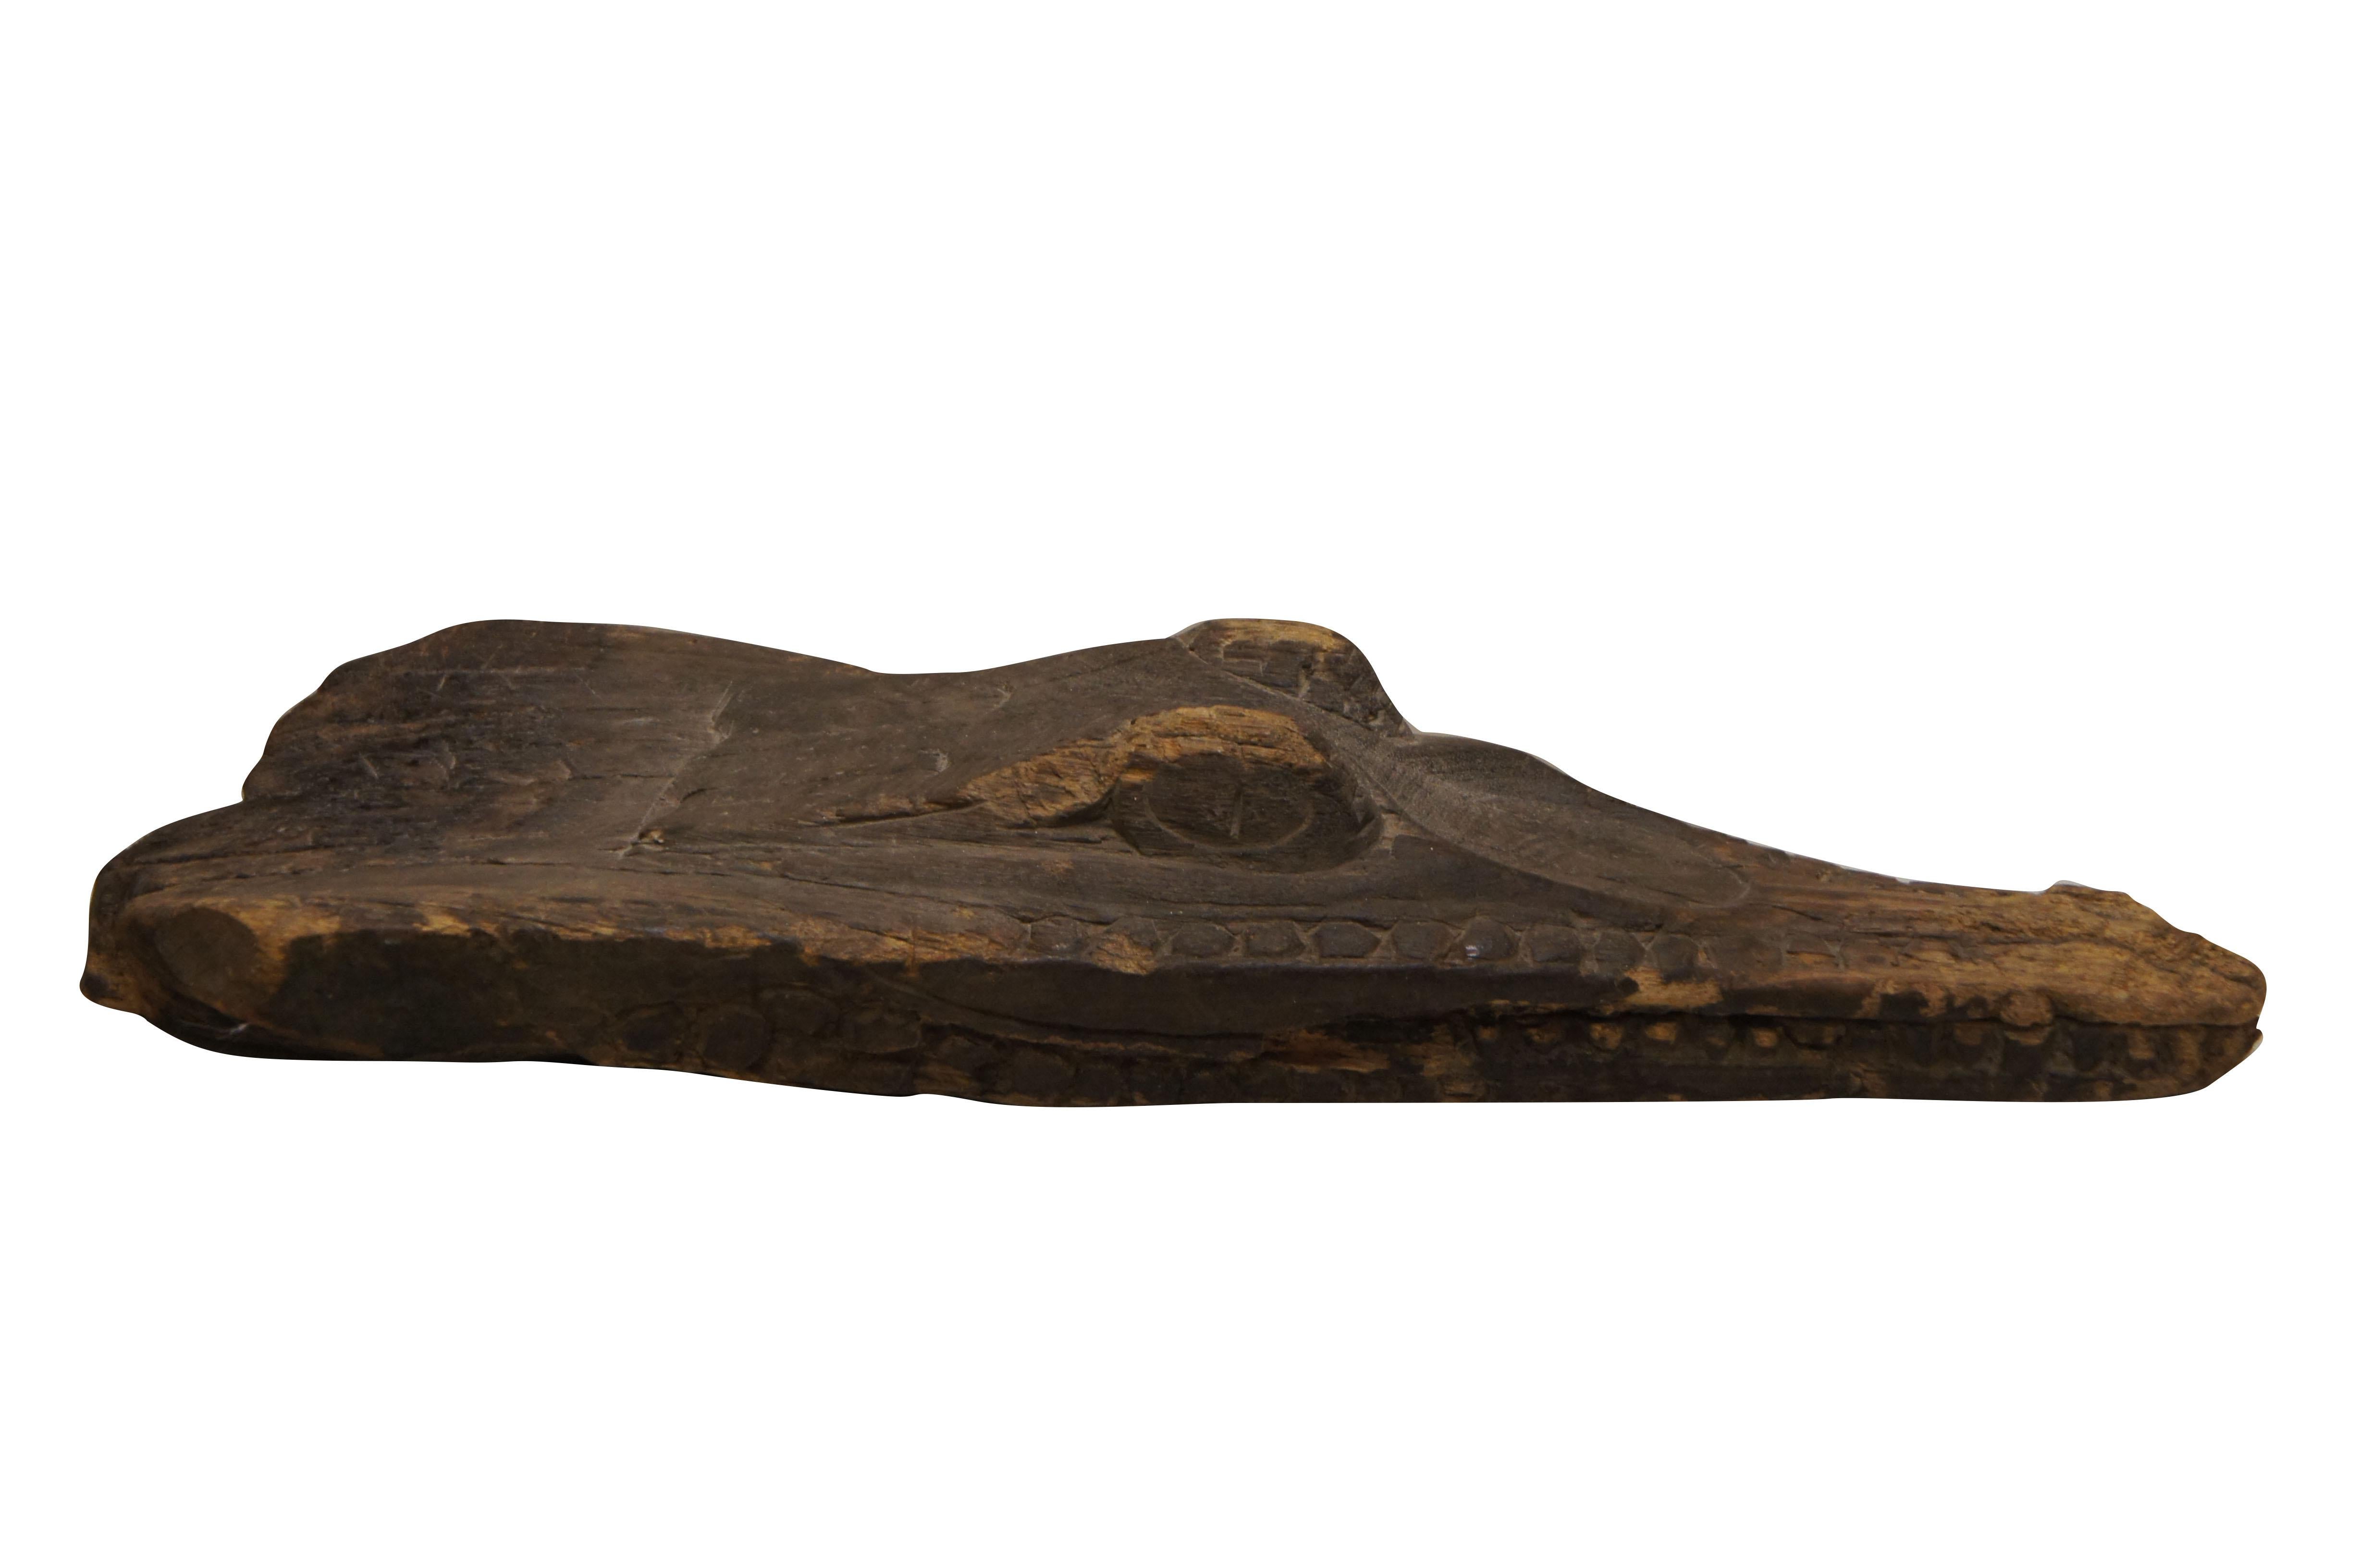 An impressive mid 20th century crocodile/alligator head boat prow. Carved from driftwood with meticulous detail. Villagers in Papua New Guinea adorned their boats and canoes with alligator prows as they traveled through inland rivers and swamp land.